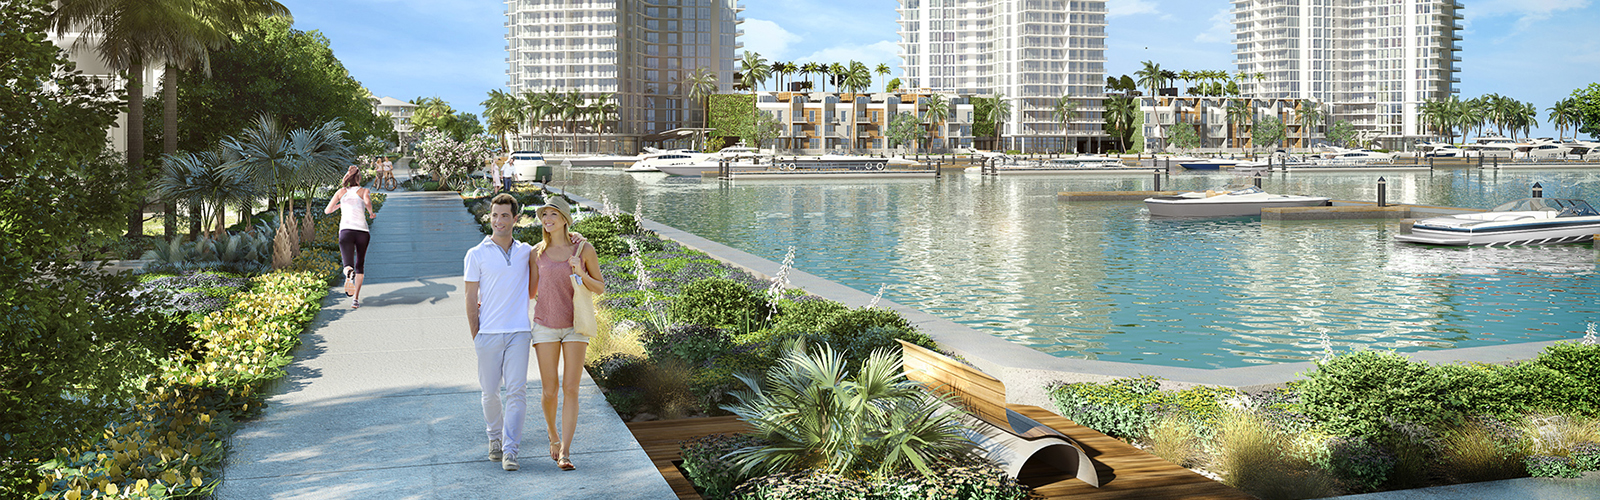 An artist's rendering of future retail development at the Westshore Marina District